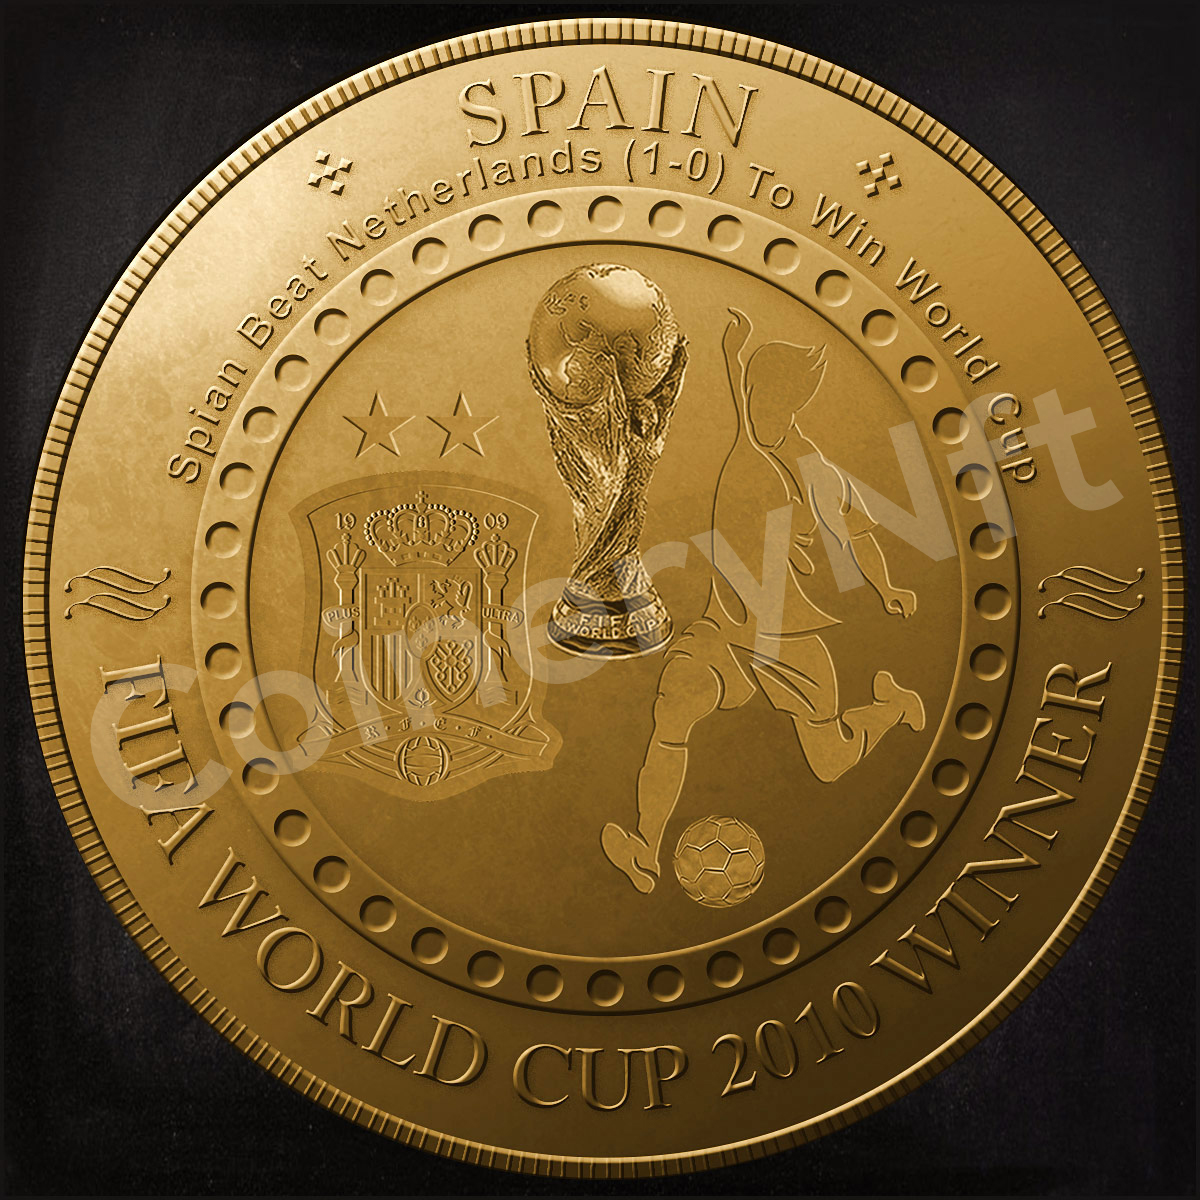 FIFA World Cup 2010, was won by Spain Beat Netherlands. There is an NFT coin made in memory of this event. @opensea @FIFAWorldCup @fifamedia @FIFAcom #nftcommunity #nftcollector #nftinvestor #nftnews #nftmagazine #nftgallery #nftbuyers #NFTshills #nftgame #worldcup #cryptonews